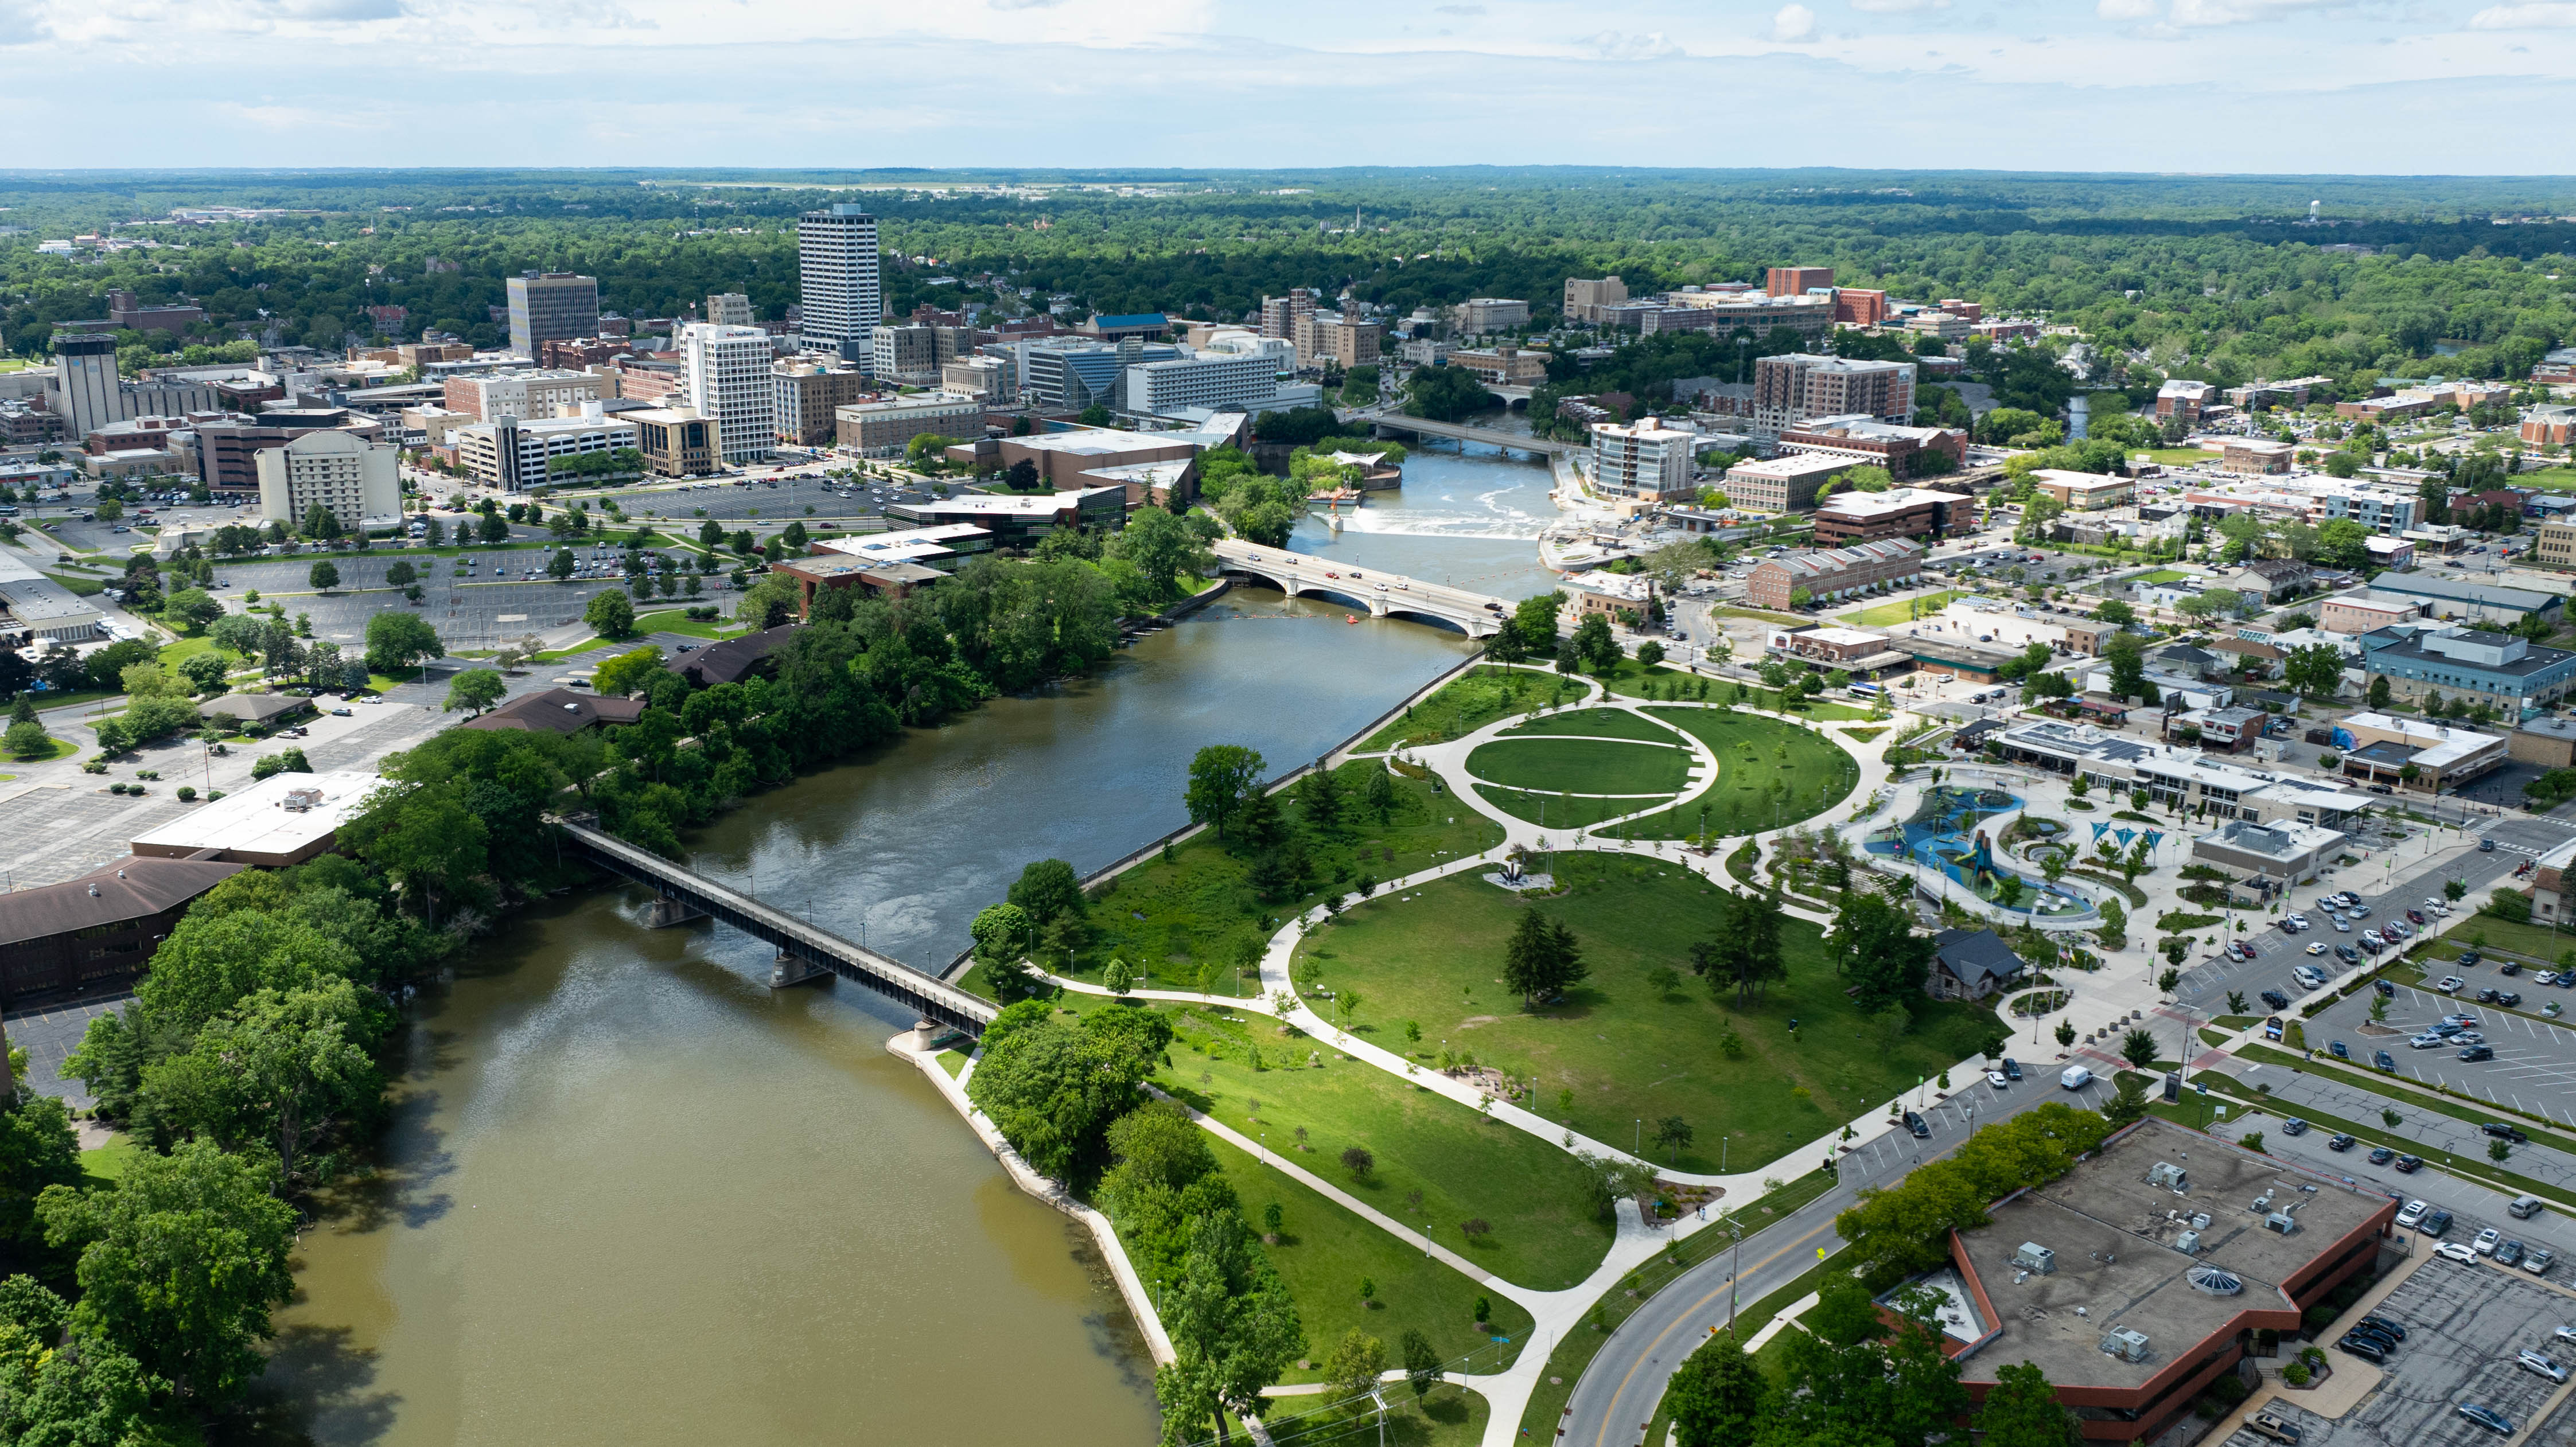 Which local city made the Top 25 for 'Best Place to Live'? South Bend, of course.